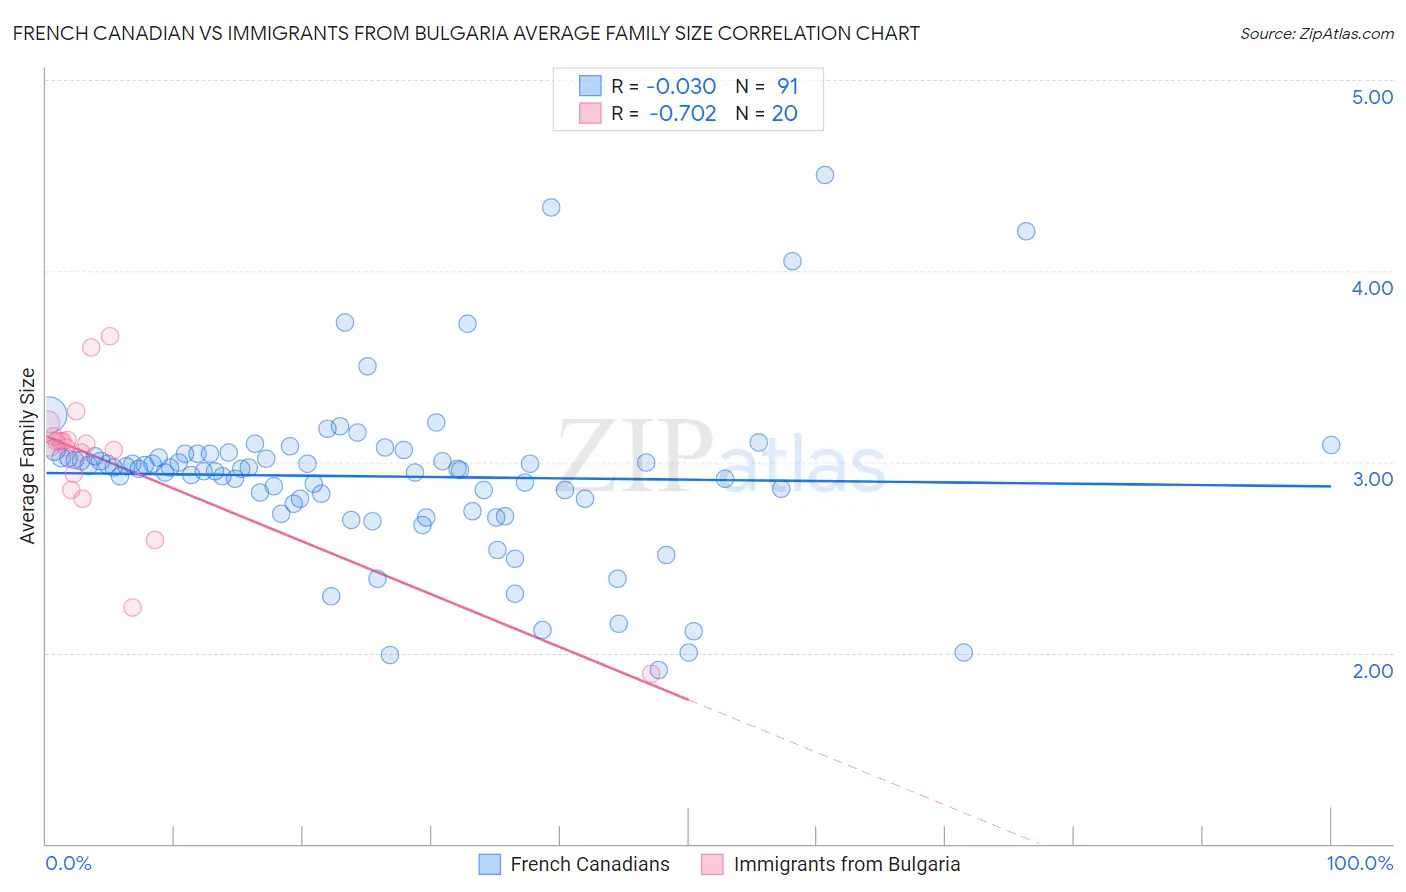 French Canadian vs Immigrants from Bulgaria Average Family Size